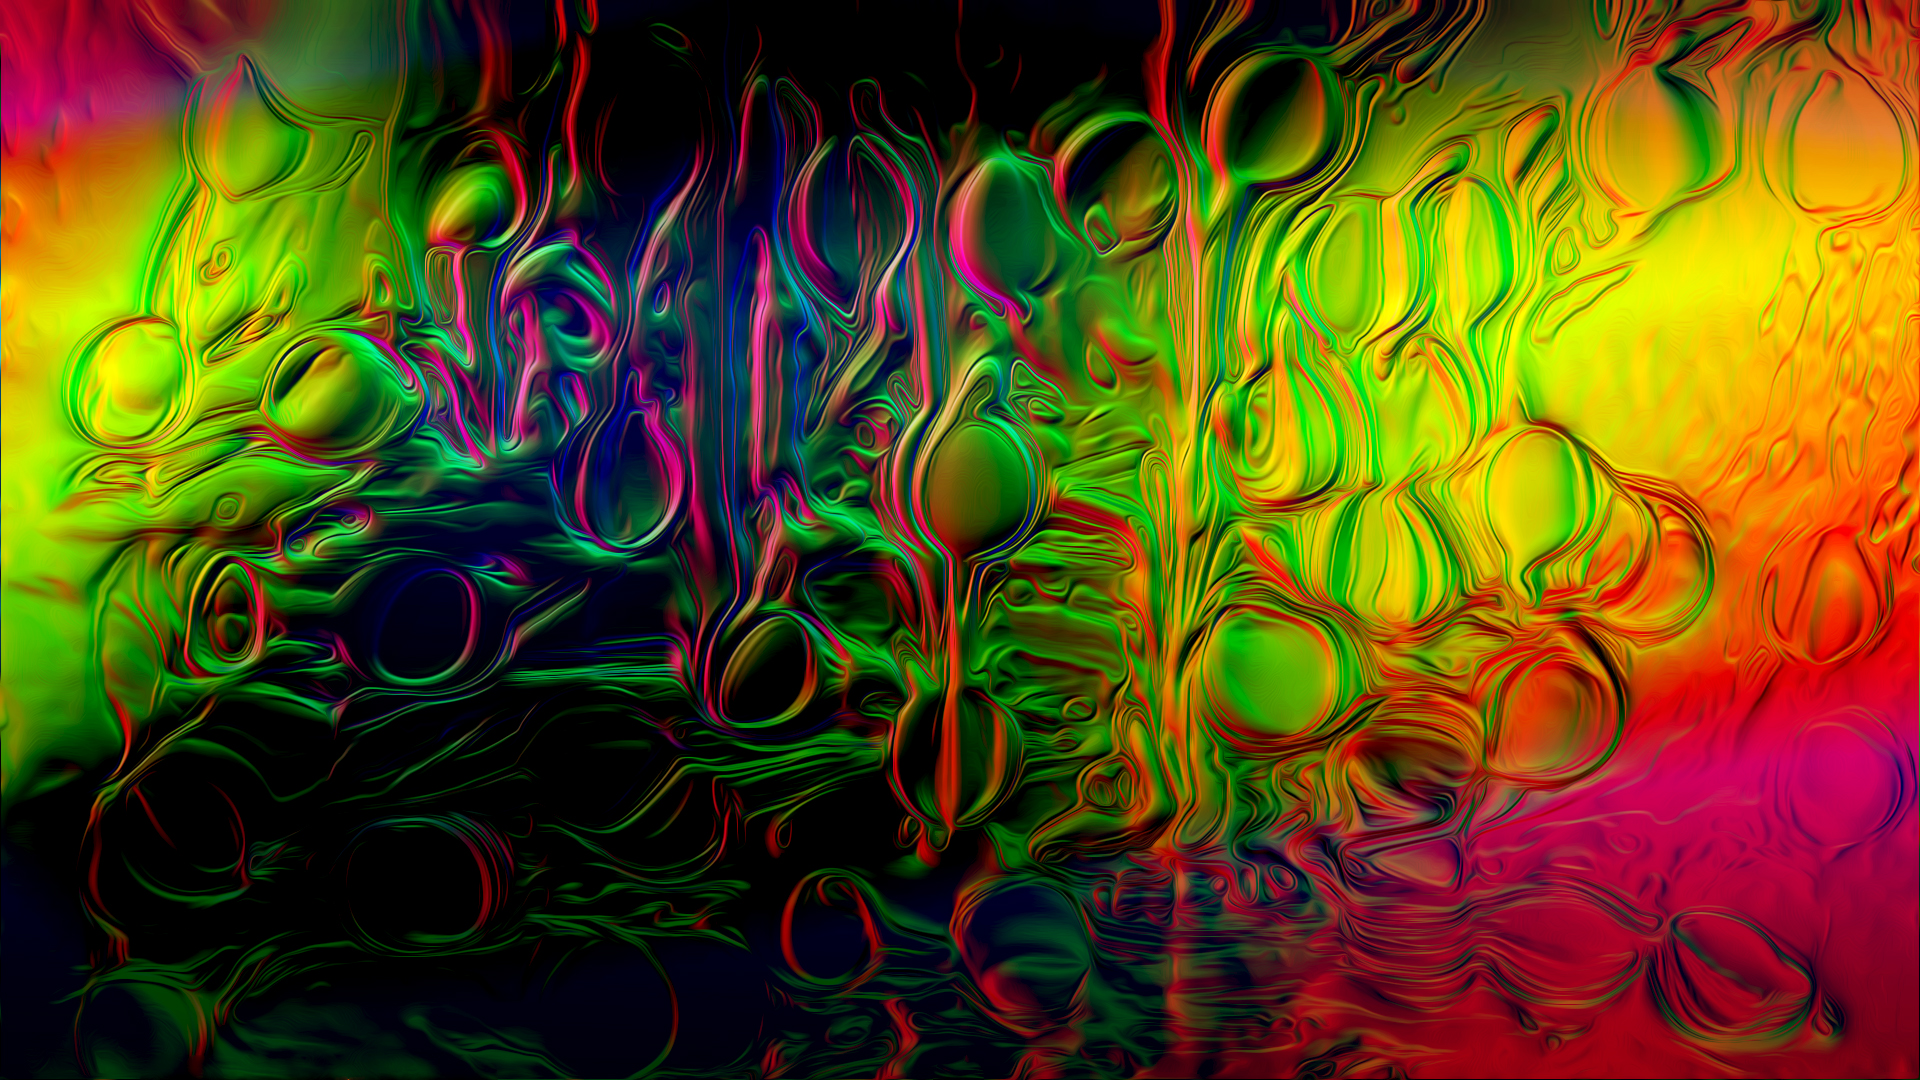 Oil Paint Artistic Colorful Digital Art 2K Abstract